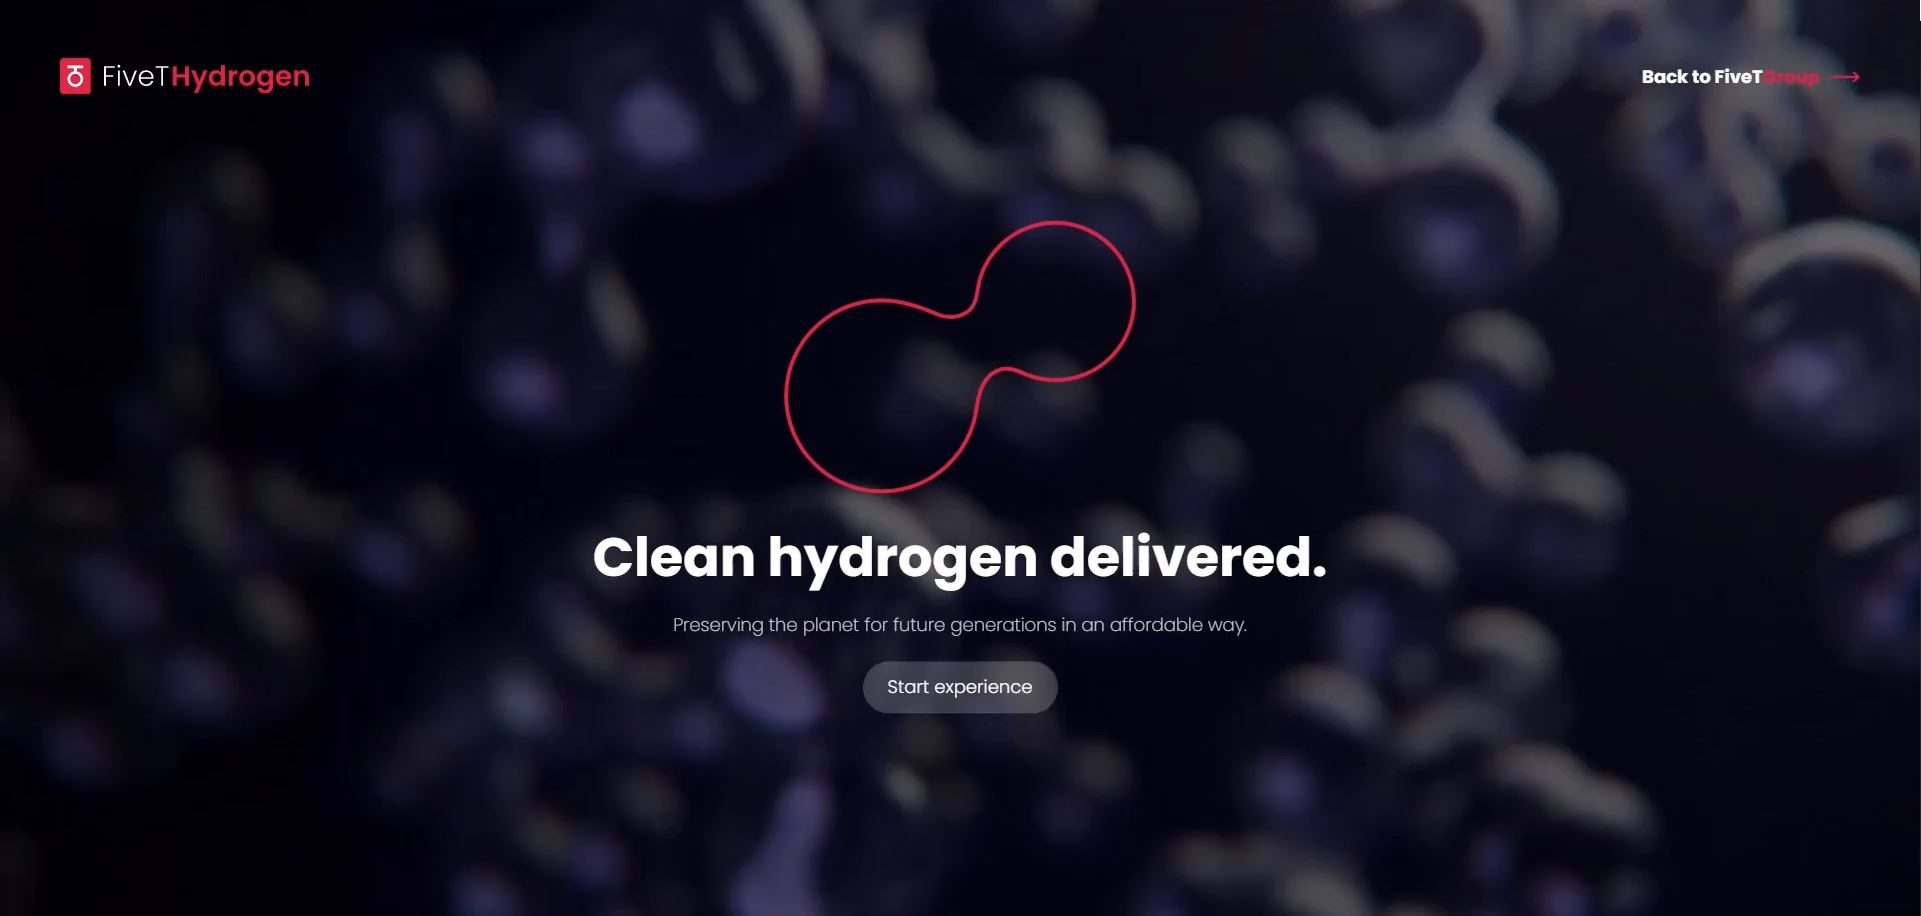 This image shows the opening homepage of FiveT hydrogen interactive website with three.JS